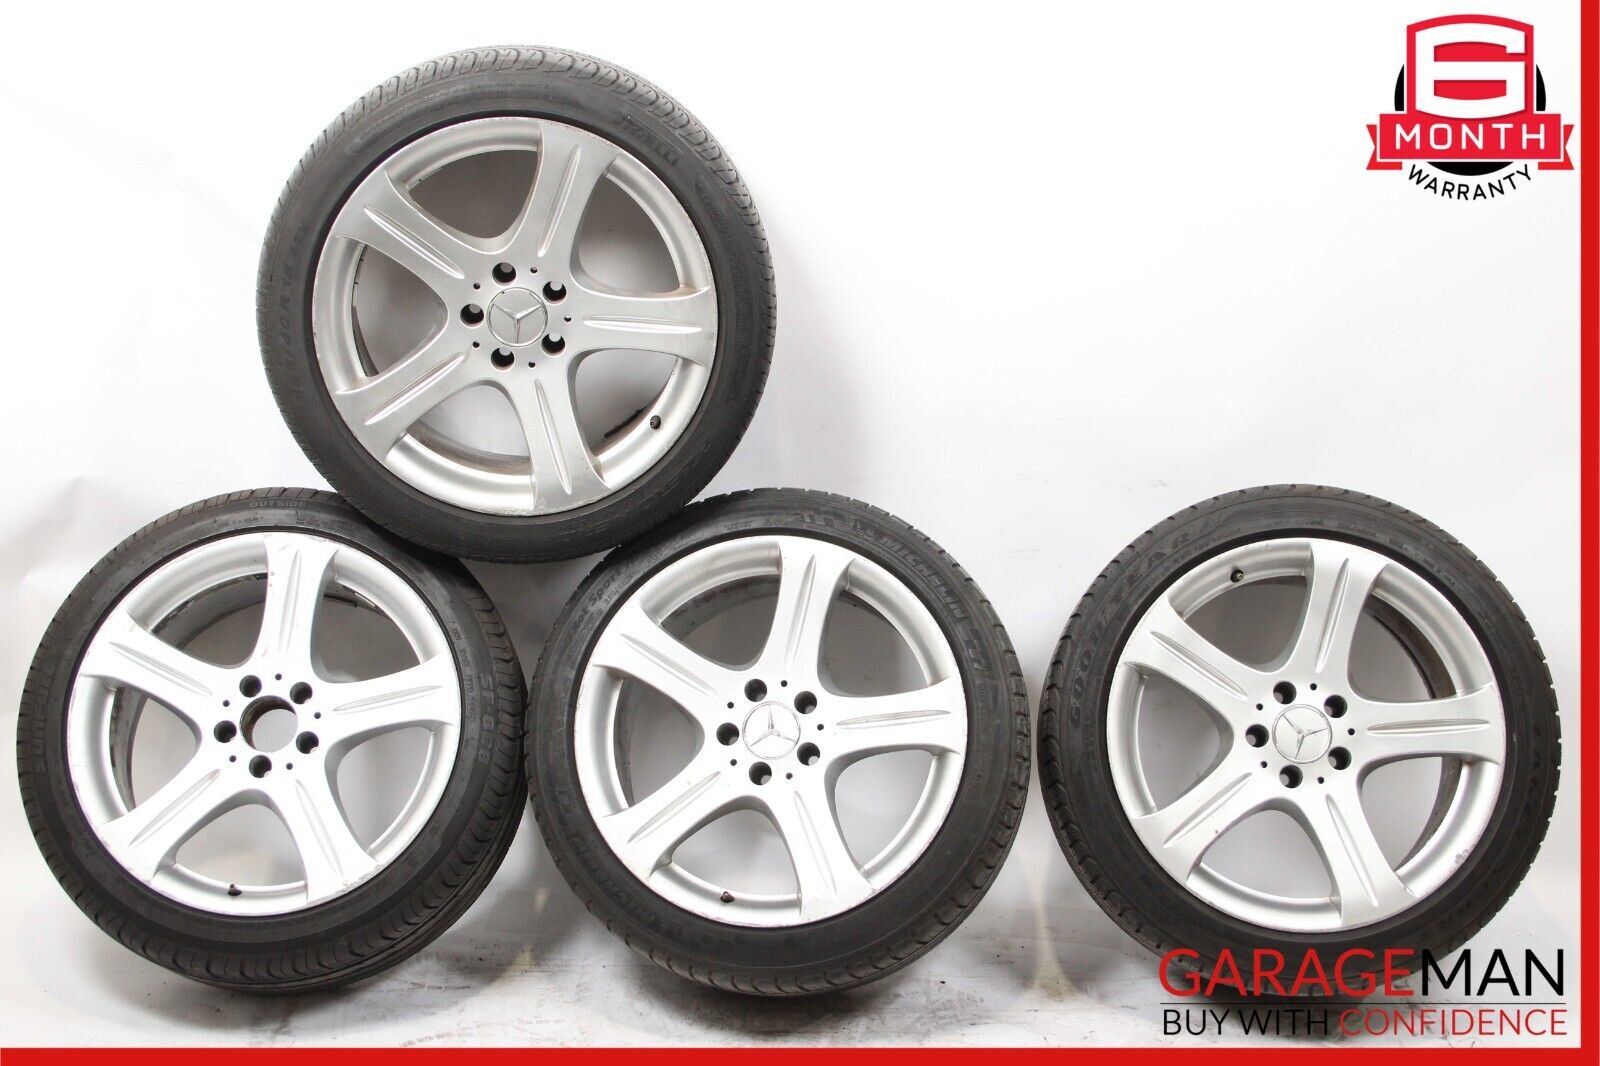 06-11 Mercedes W219 CLS350 CLS550 Staggered R18 8.5x9.5 Wheel Tire Rim Set of 4